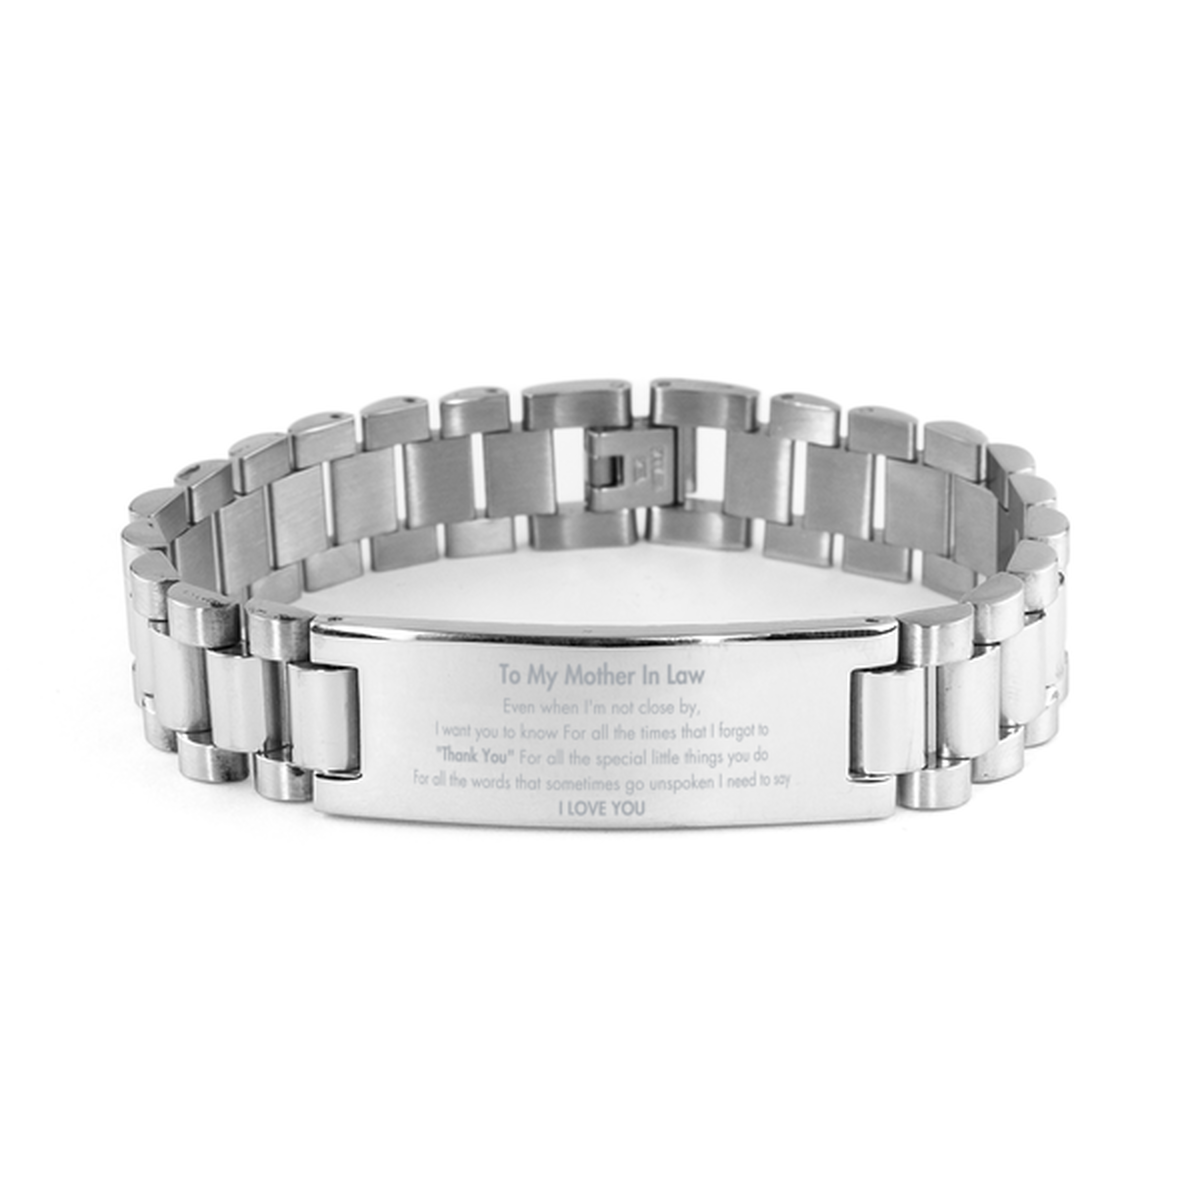 Thank You Gifts for Mother In Law, Keepsake Ladder Stainless Steel Bracelet Gifts for Mother In Law Birthday Mother's day Father's Day Mother In Law For all the words That sometimes go unspoken I need to say I LOVE YOU